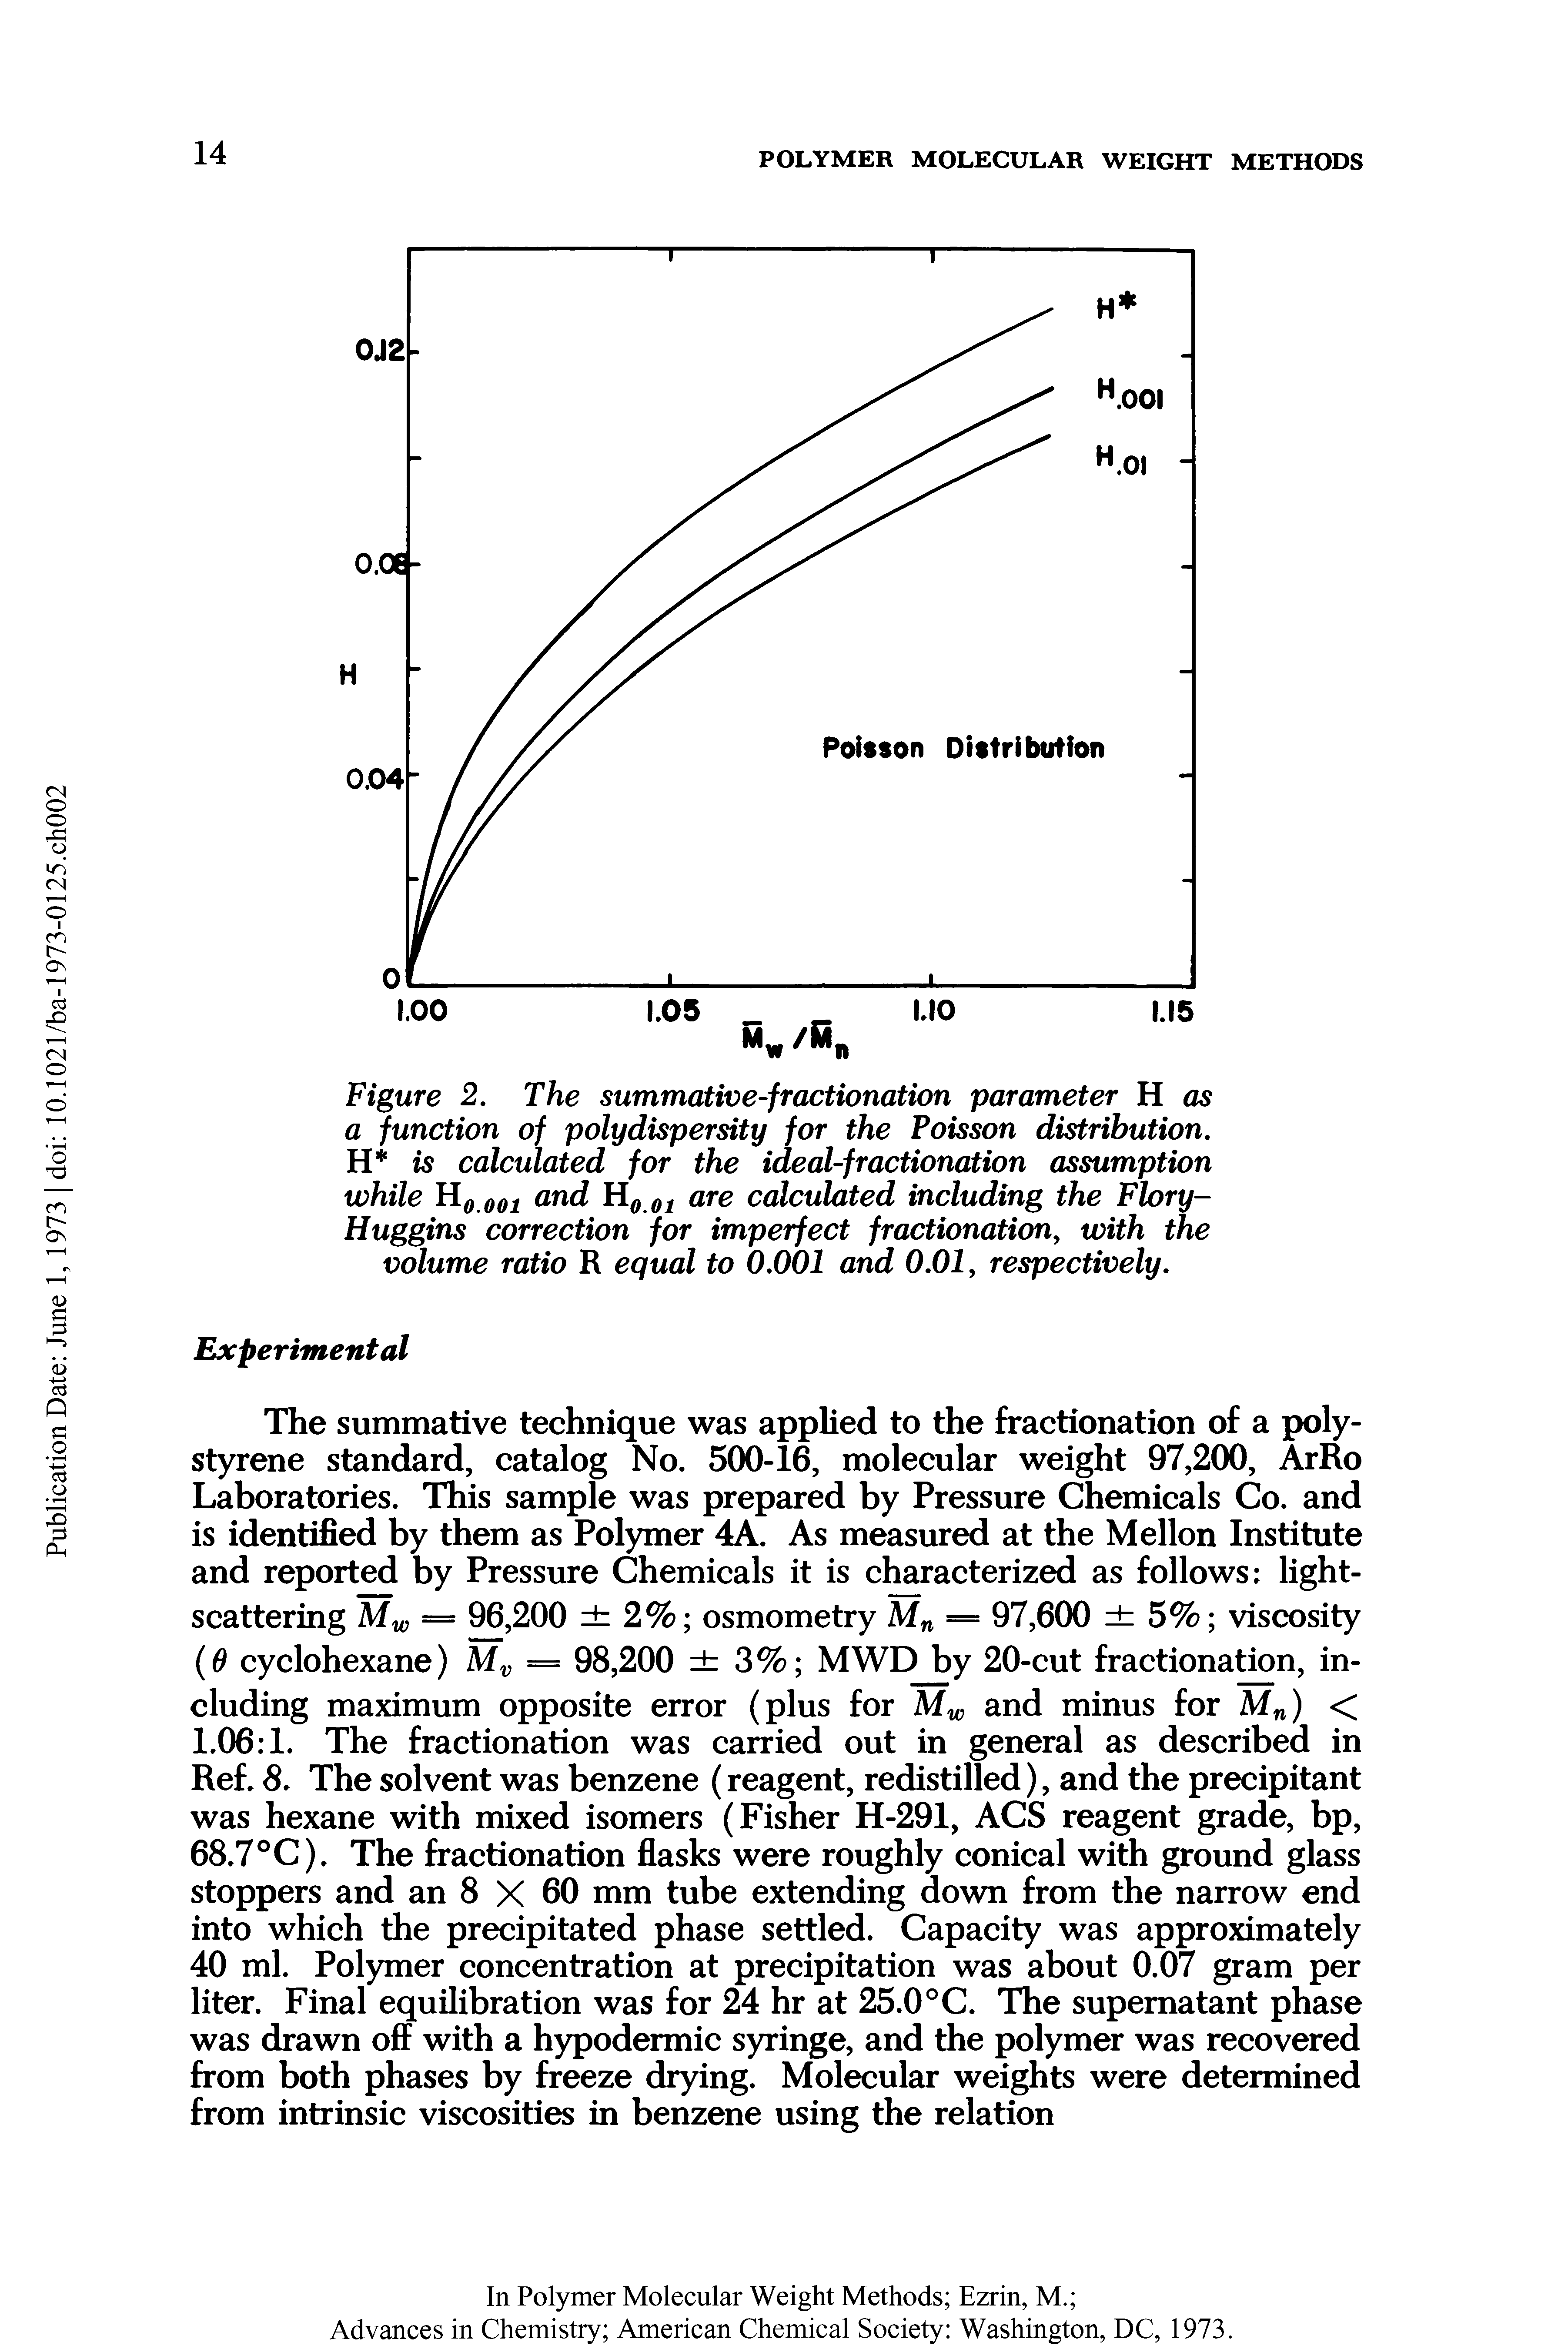 Figure 2. The summative-fractionation parameter H as a function of polydispersity for the Poisson distribution. H is calculated for the ideal-fractionation assumption while H0.001 and H0 01 we calculated including the Flory-Huggins correction for imperfect fractionation, with the volume ratio R equal to 0.001 and 0.01, respectively.